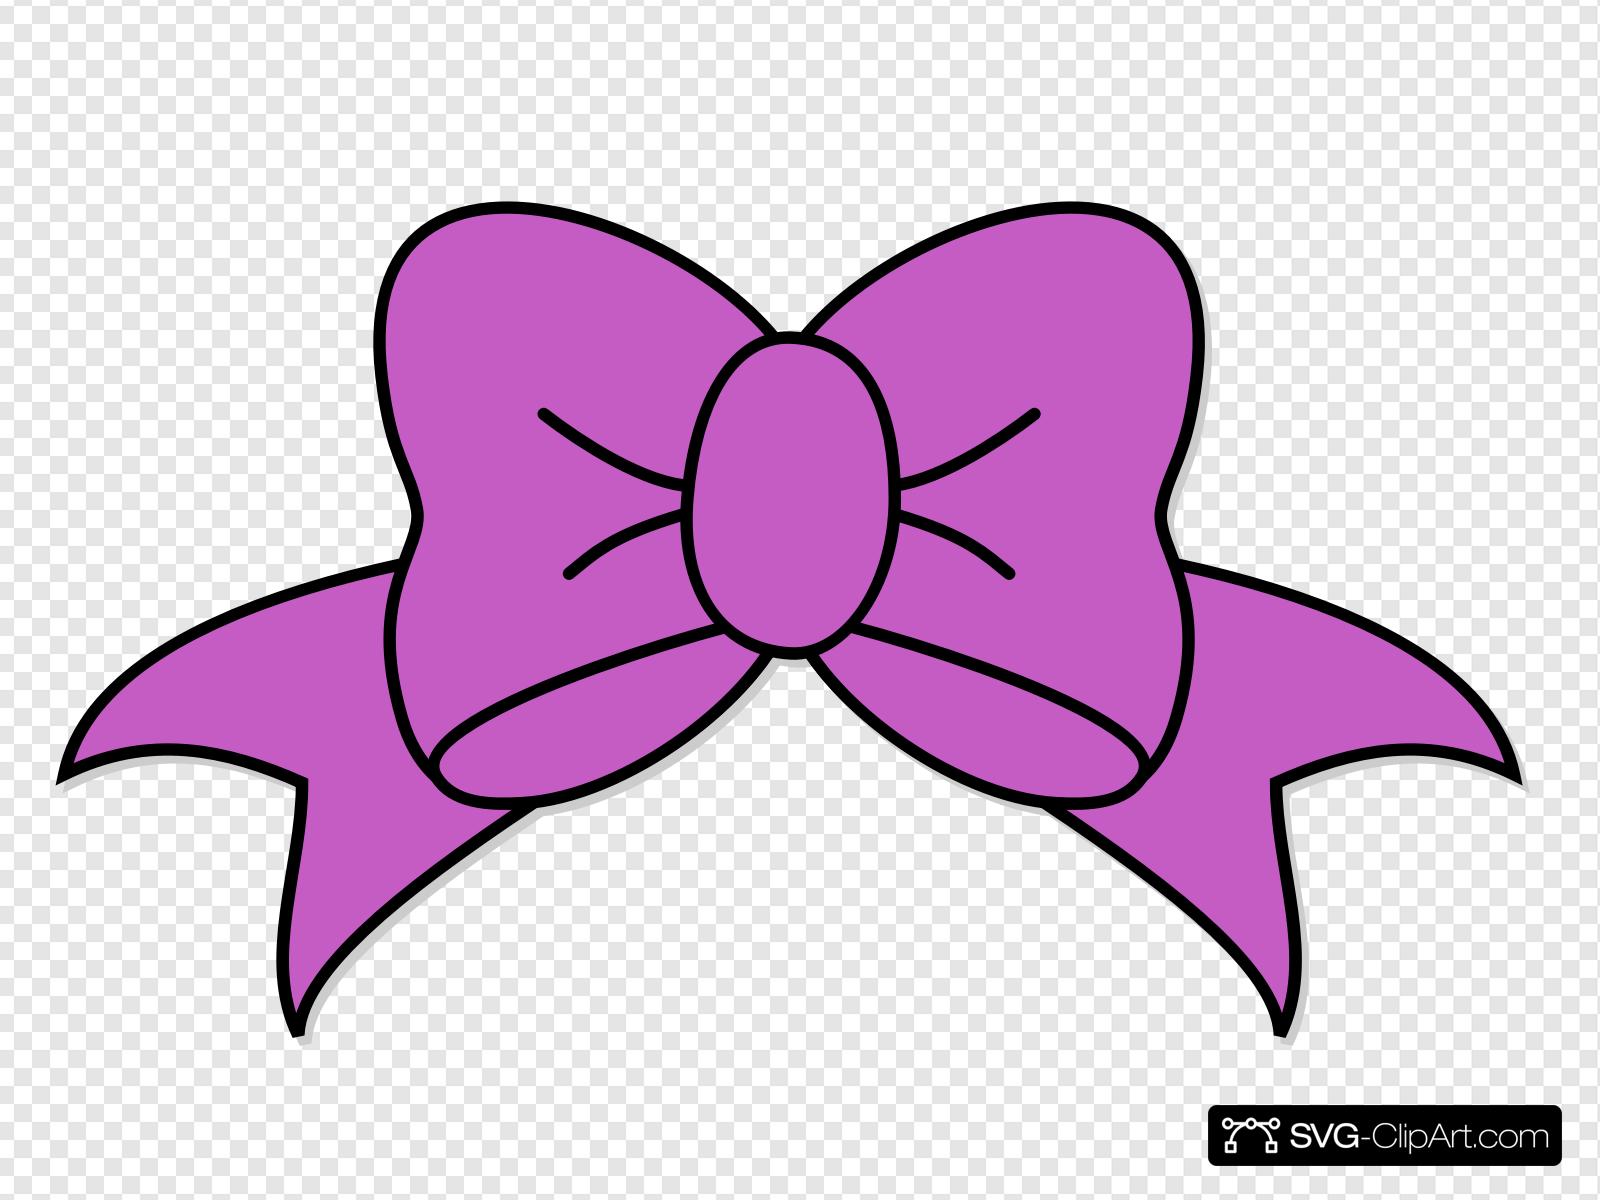 Purple Hair Bow Clip art, Icon and SVG.